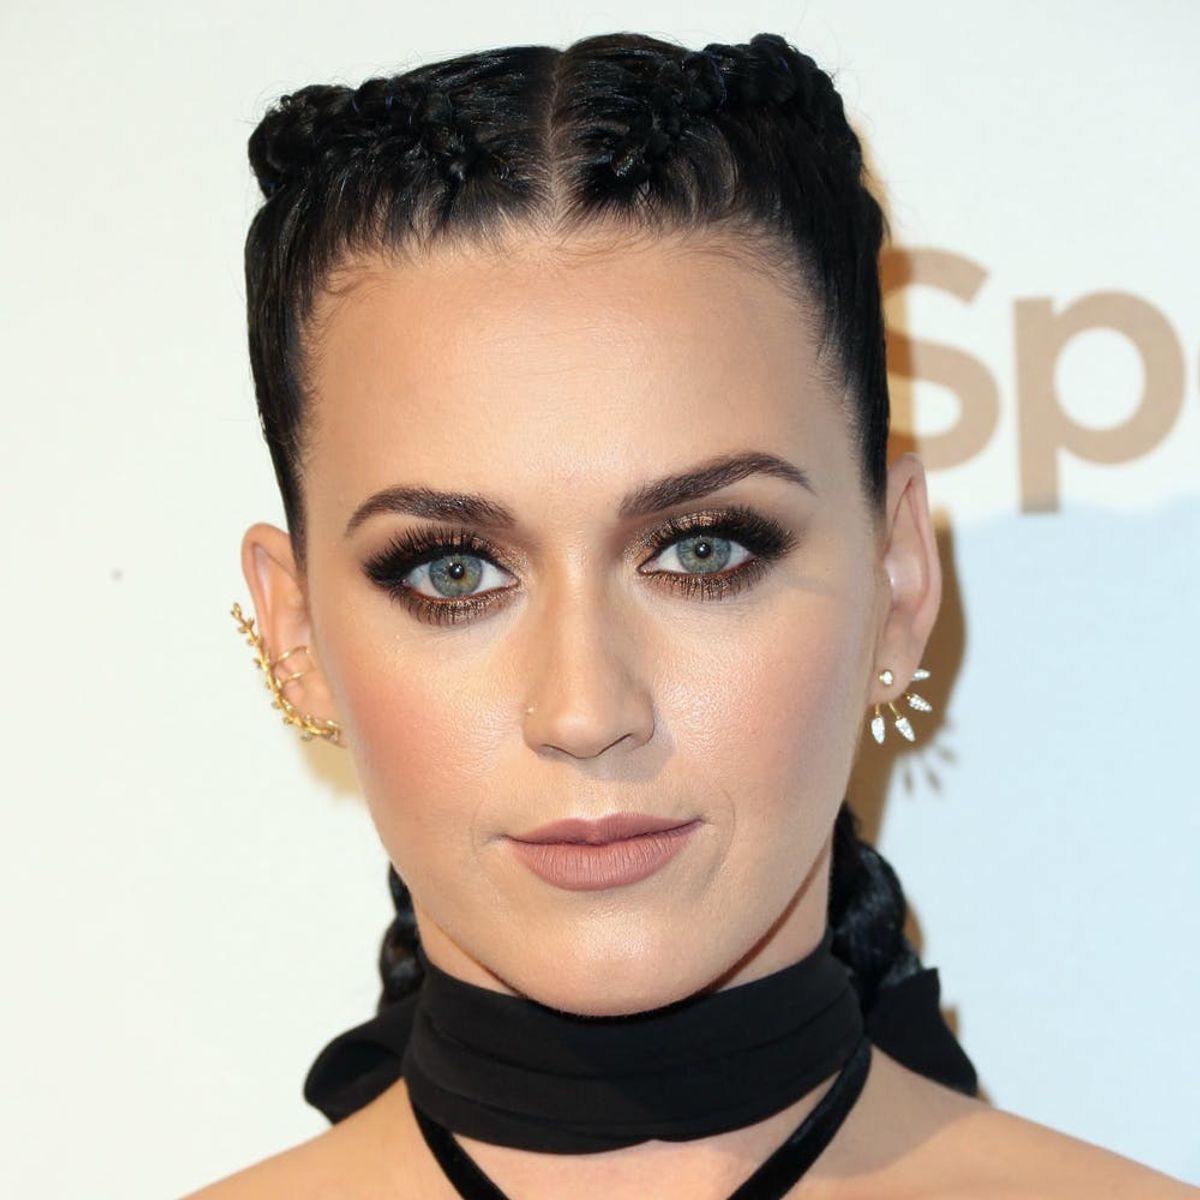 This Is What Katy Perry Has to Say About That Crazy Catfish Story